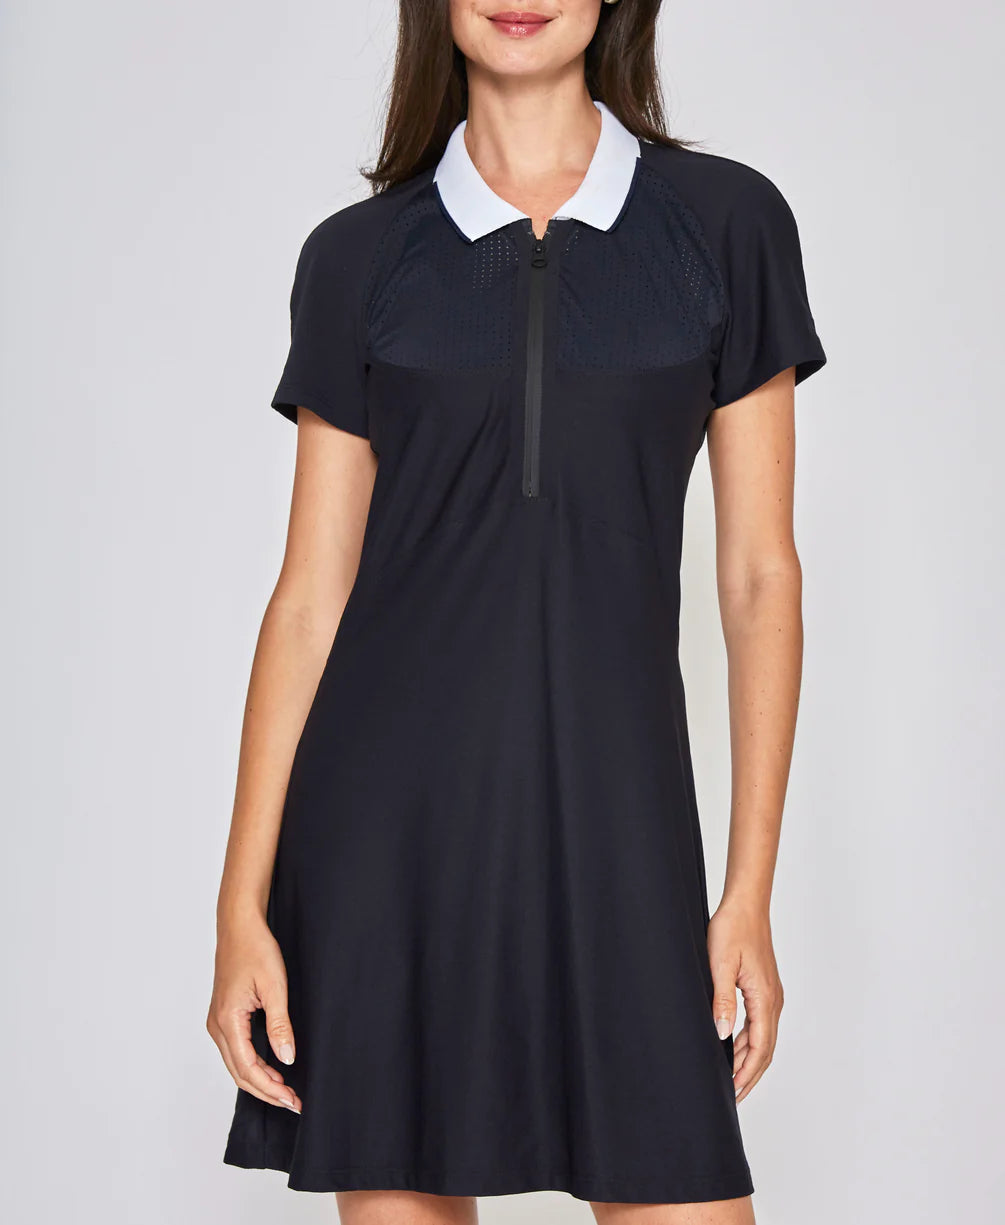 Mesh Zip Performance Dress in Navy with White Trim